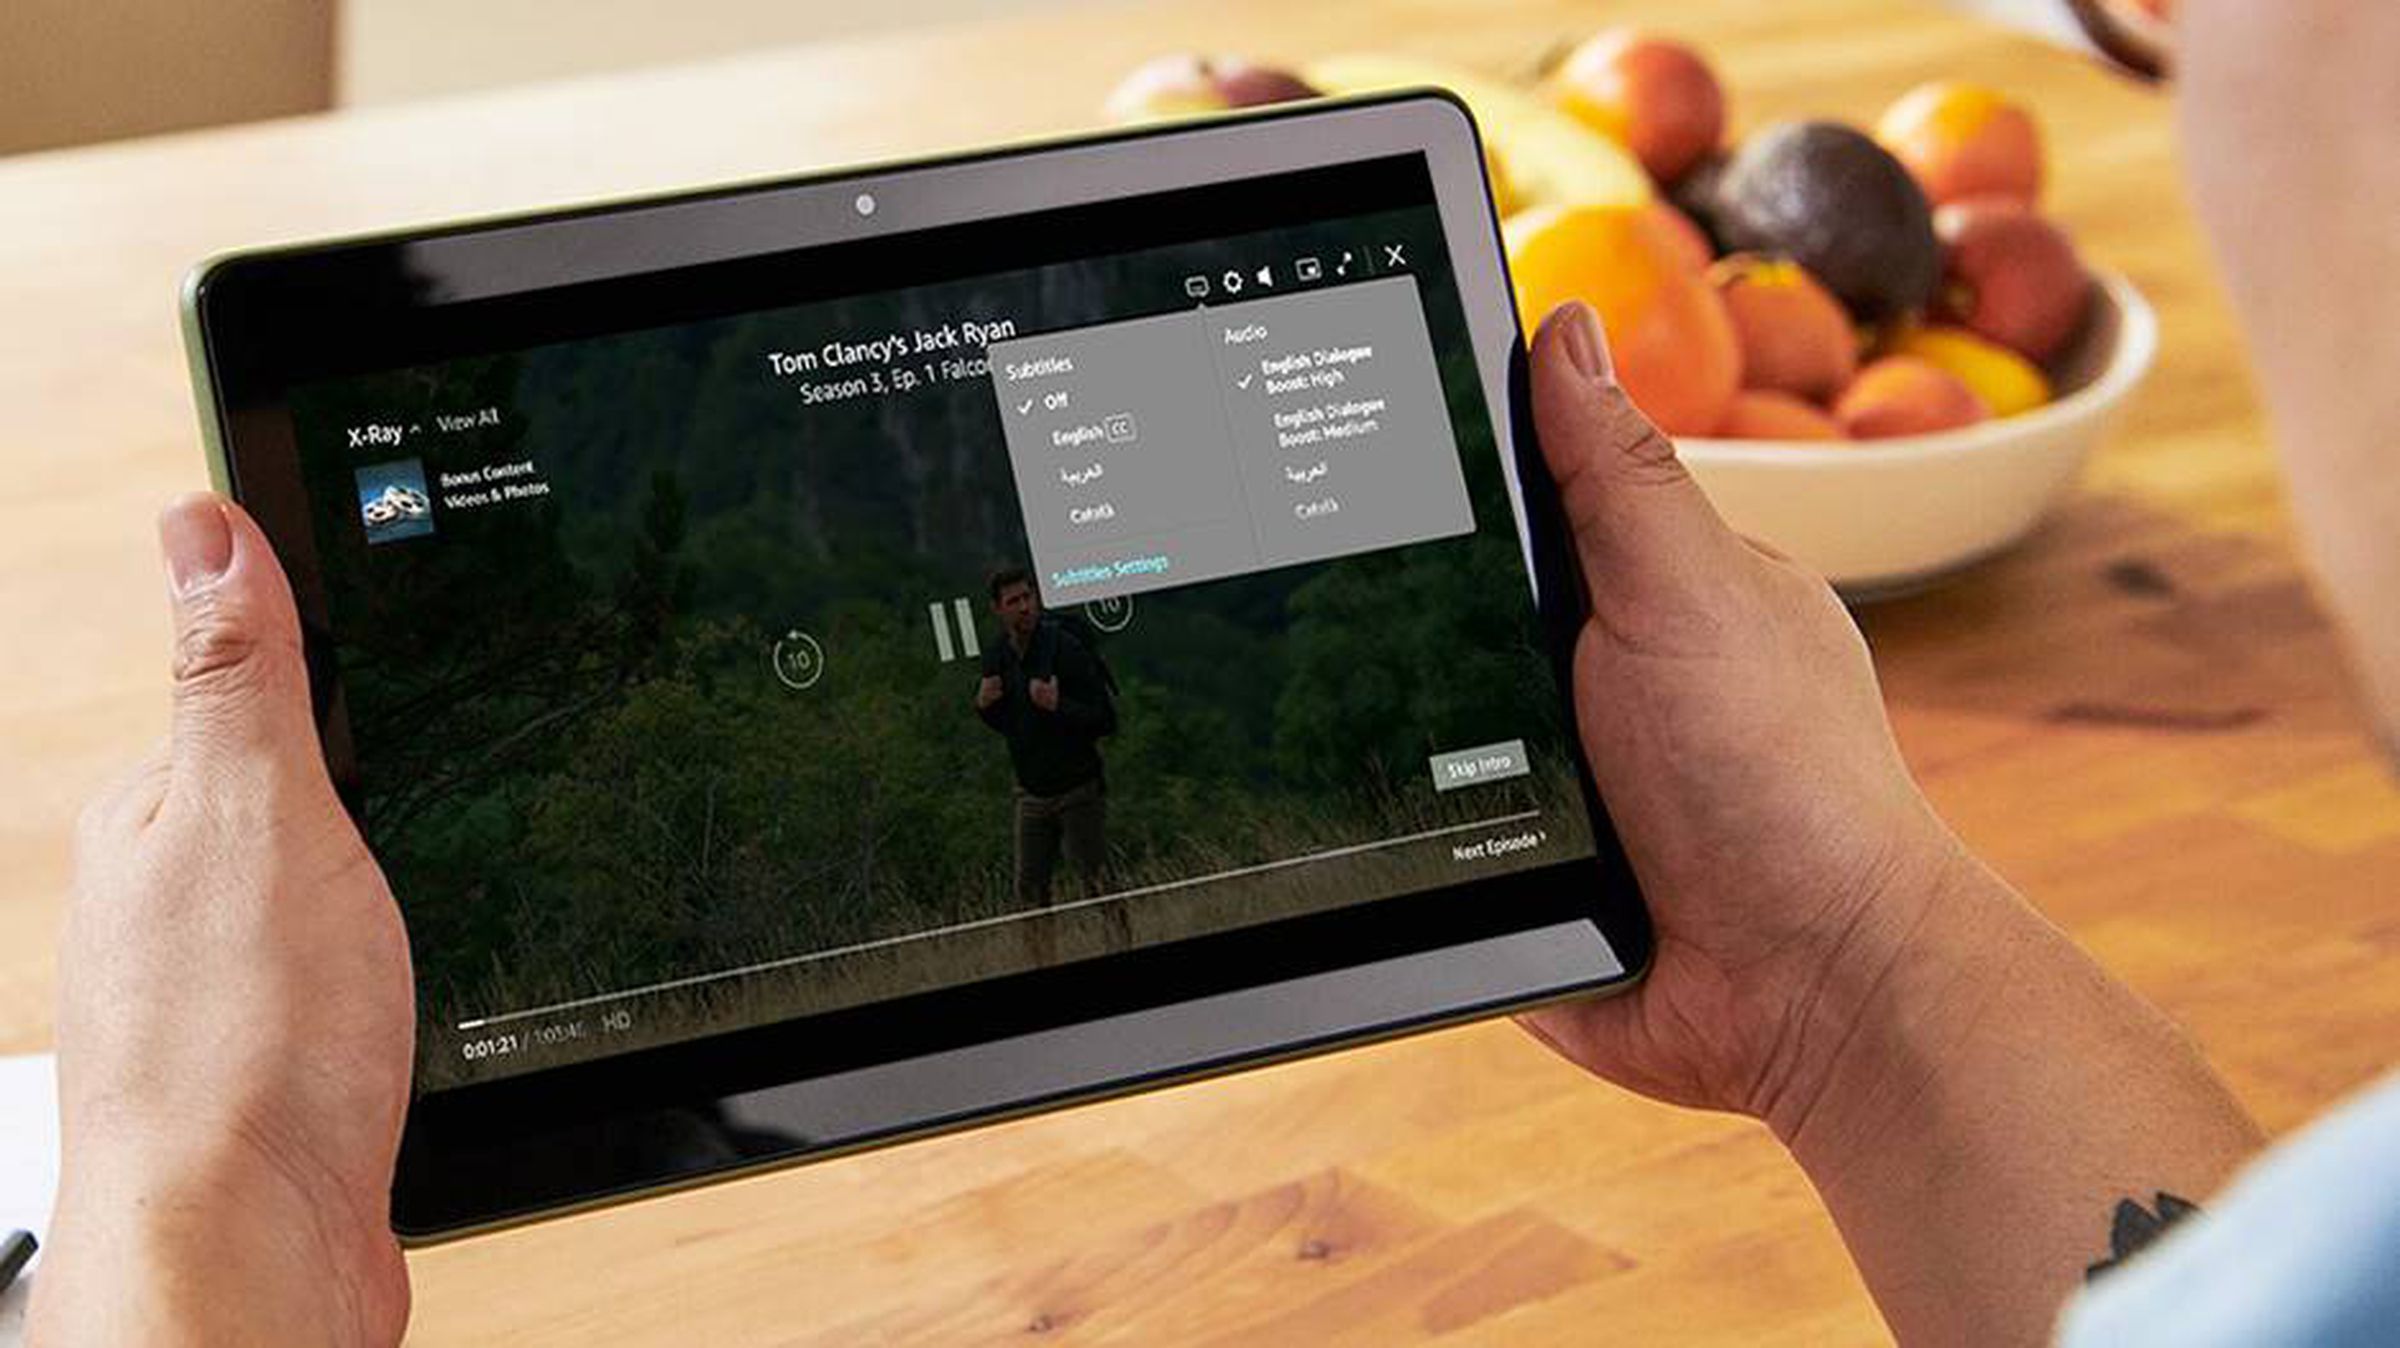 A marketing image of a tablet running Prime Video with the new Dialogue Boost feature.